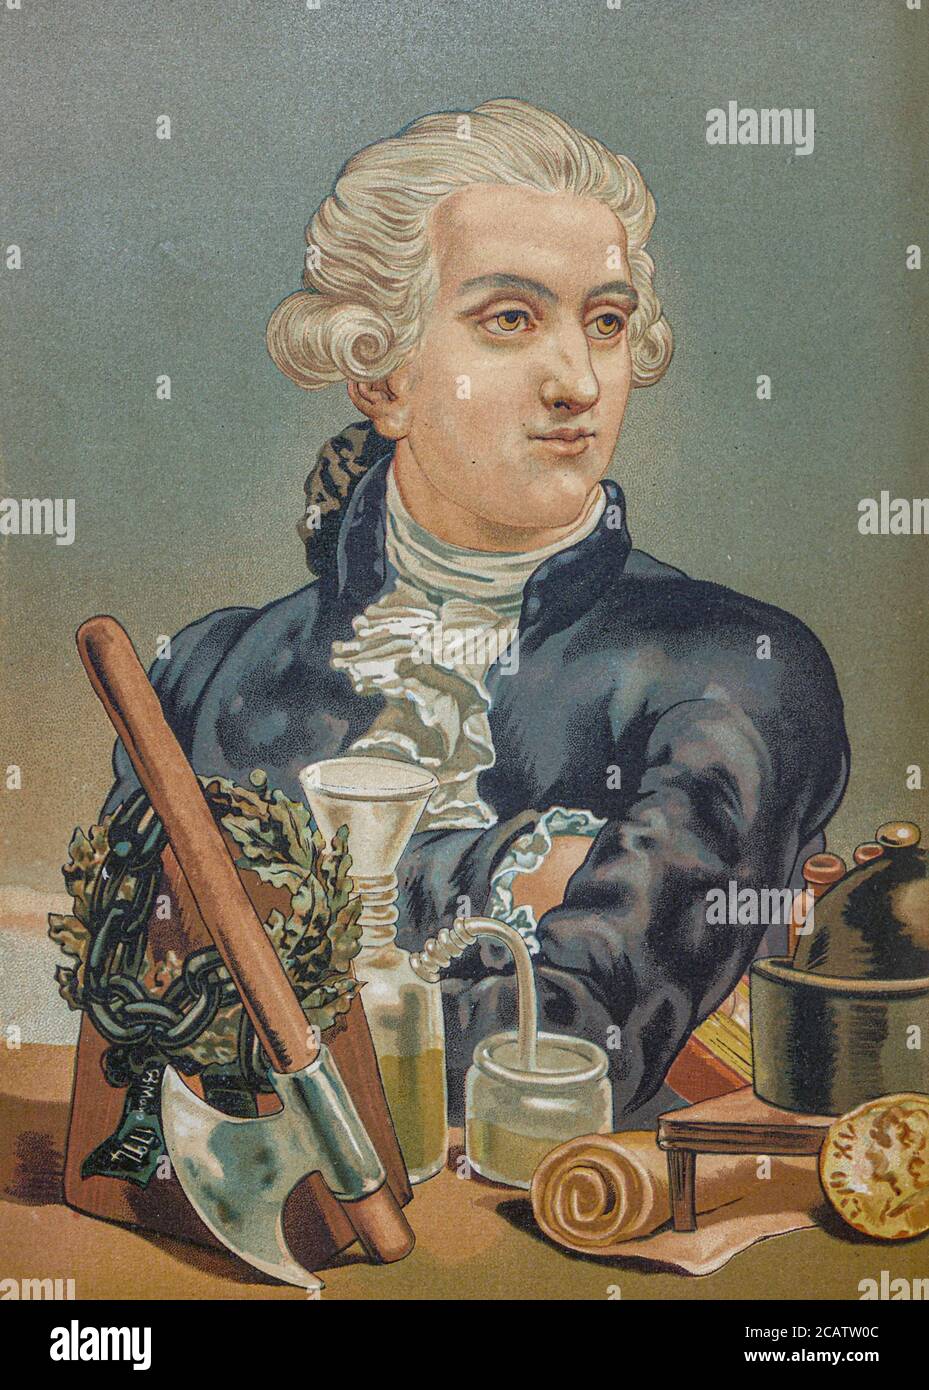 Antoine-Laurent de Lavoisier (26 August 1743 – 8 May 1794), also Antoine Lavoisier after the French Revolution, was a French nobleman and chemist who was central to the 18th-century chemical revolution and who had a large influence on both the history of chemistry and the history of biology. He is widely considered in popular literature as the 'father of modern chemistry'. From the book La ciencia y sus hombres : vidas de los sabios ilustres desde la antigüedad hasta el siglo XIX T. 3  [Science and its men: lives of the illustrious sages from antiquity to the 19th century Vol 3] By by Figuier, Stock Photo